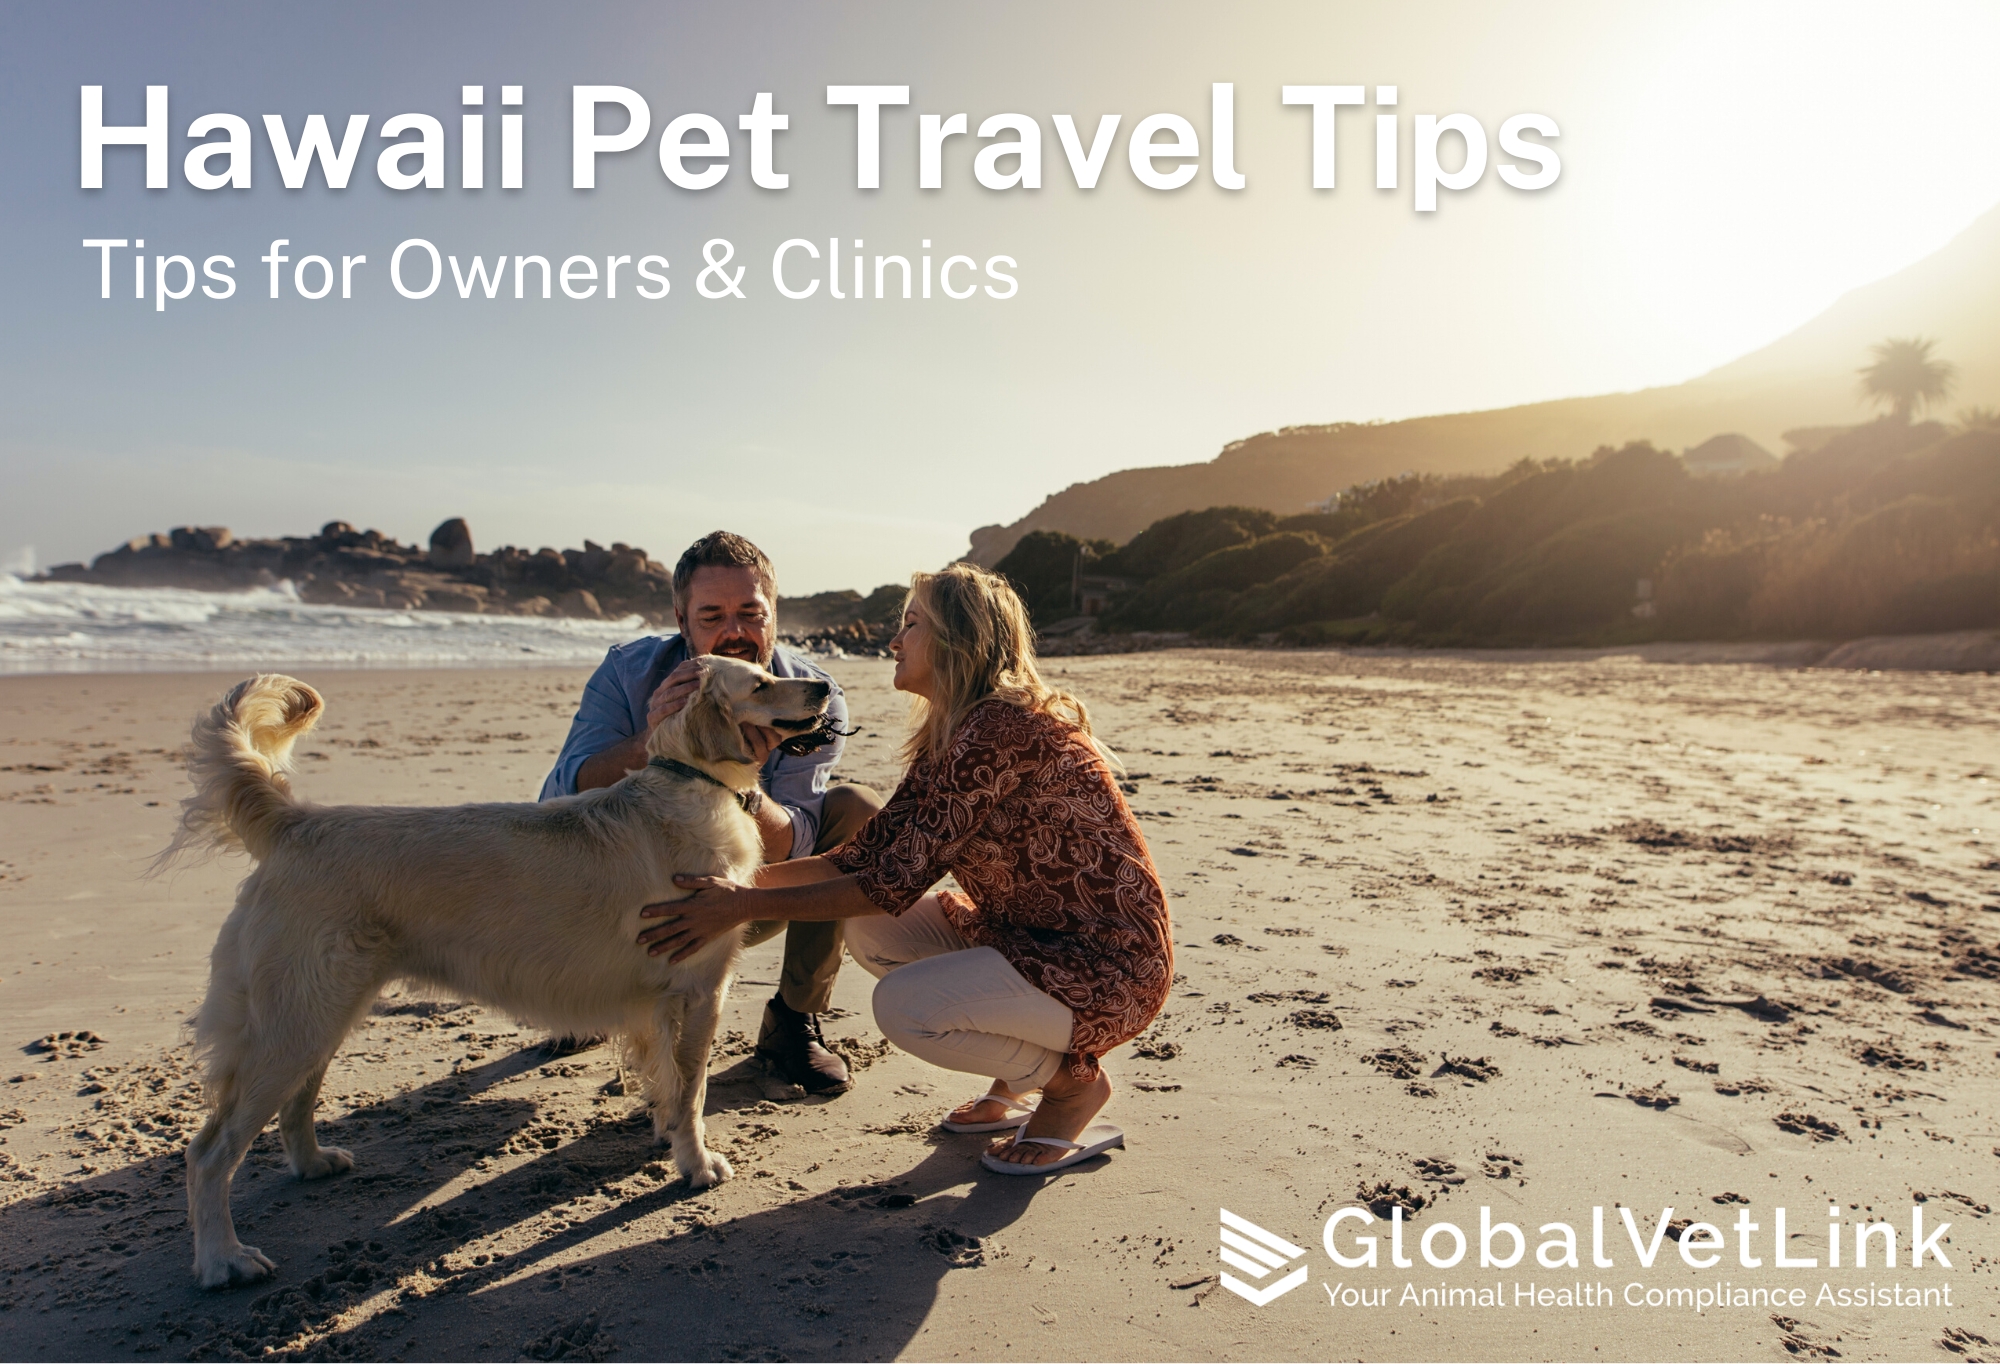 pet travel to hawaii requirements